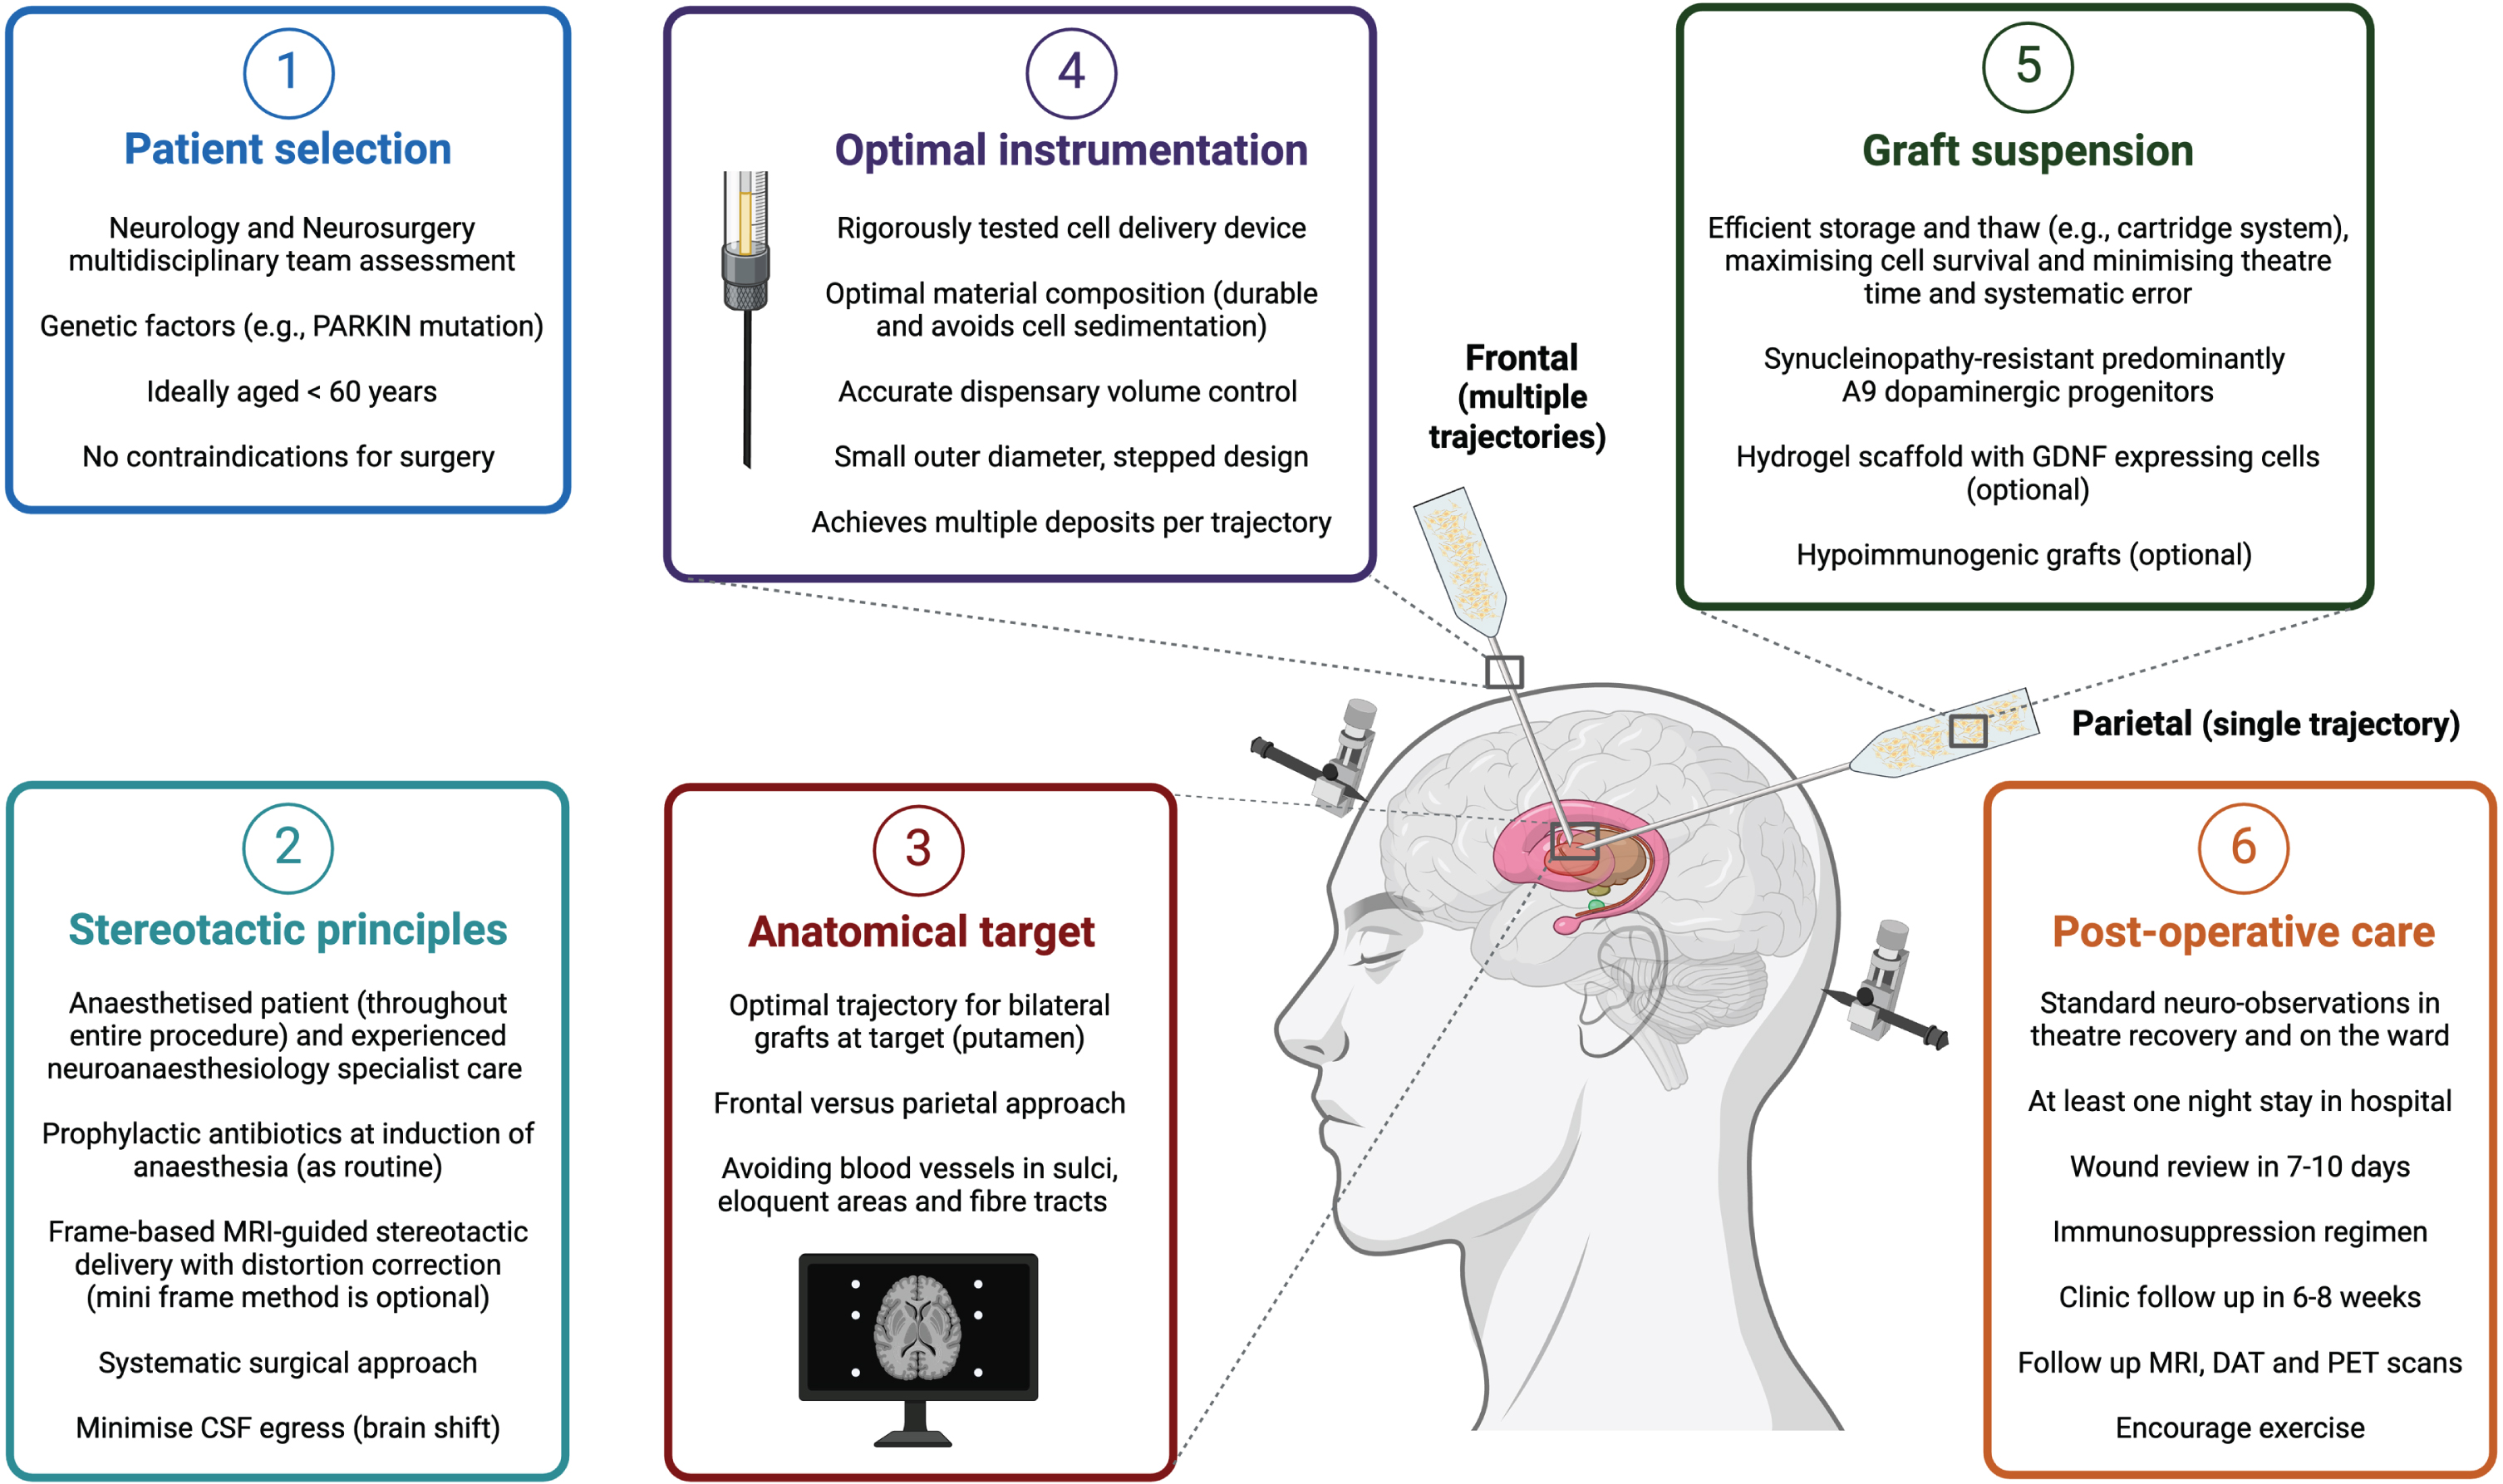 Optimizing neurosurgical delivery in an ideal cell replacement therapy paradigm for Parkinson’s disease.